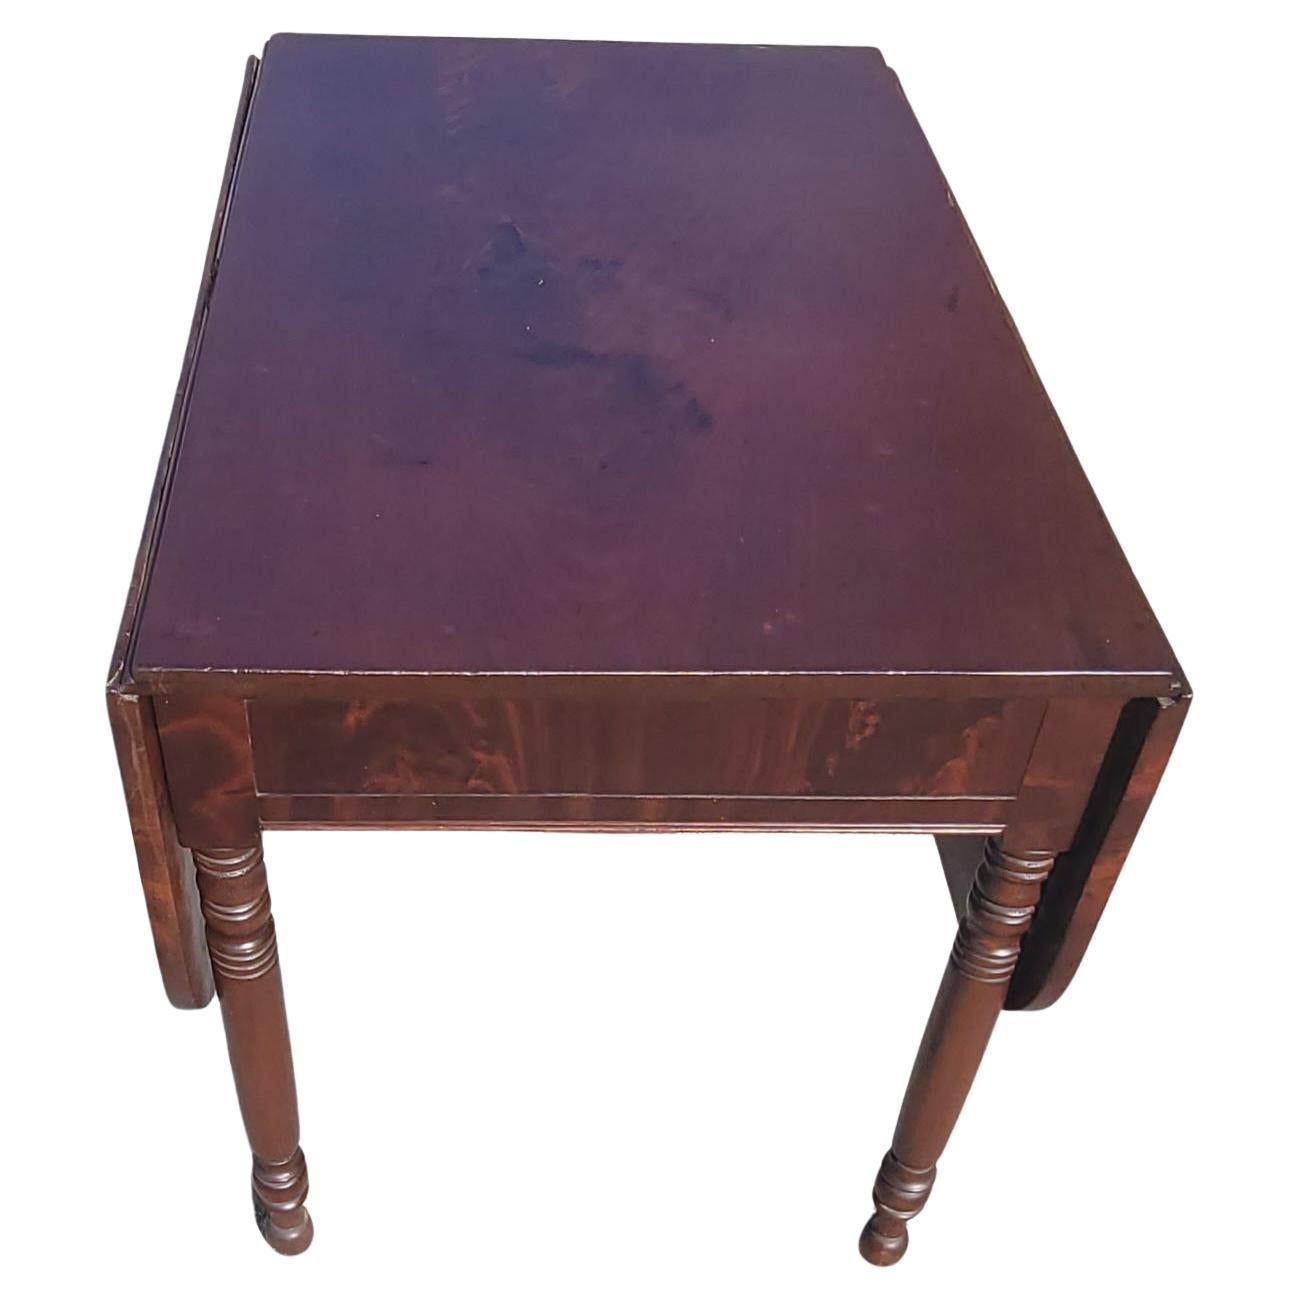 19th Century American Empire Federal Flame Mahogany Drop-Leaf Dining Table For Sale 1